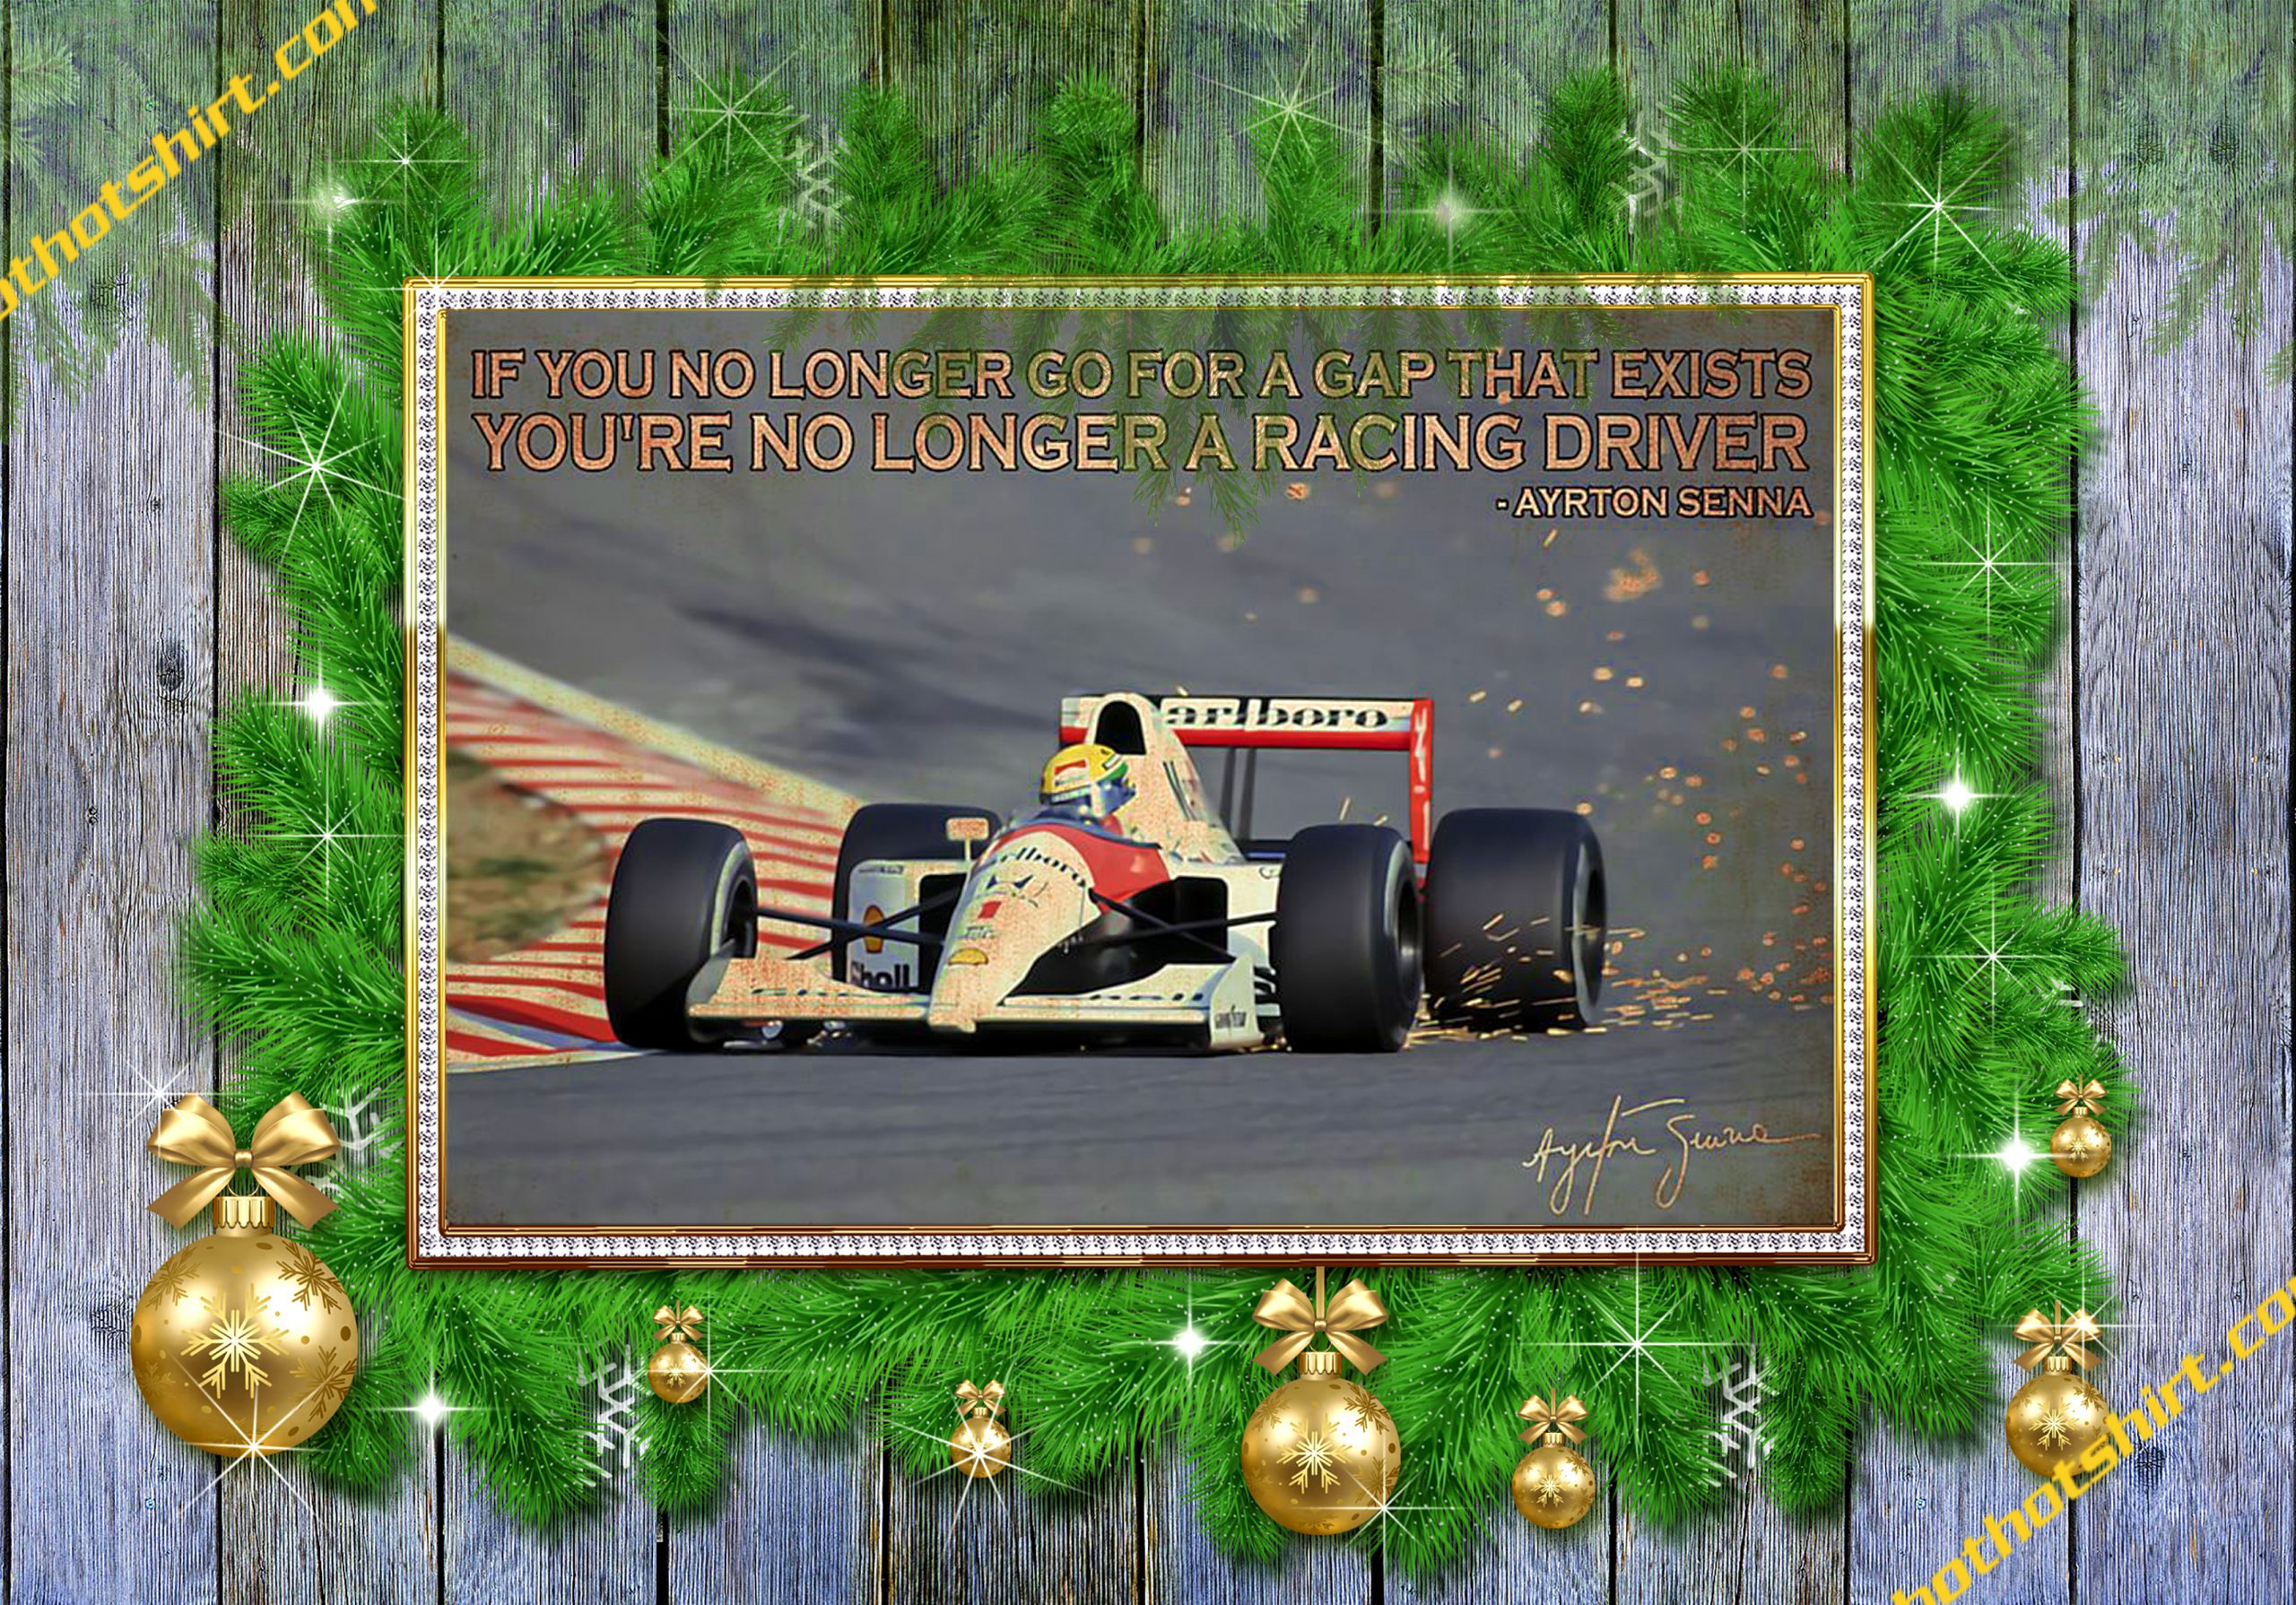 If you longer go for a gap that exists ayrton senna poster